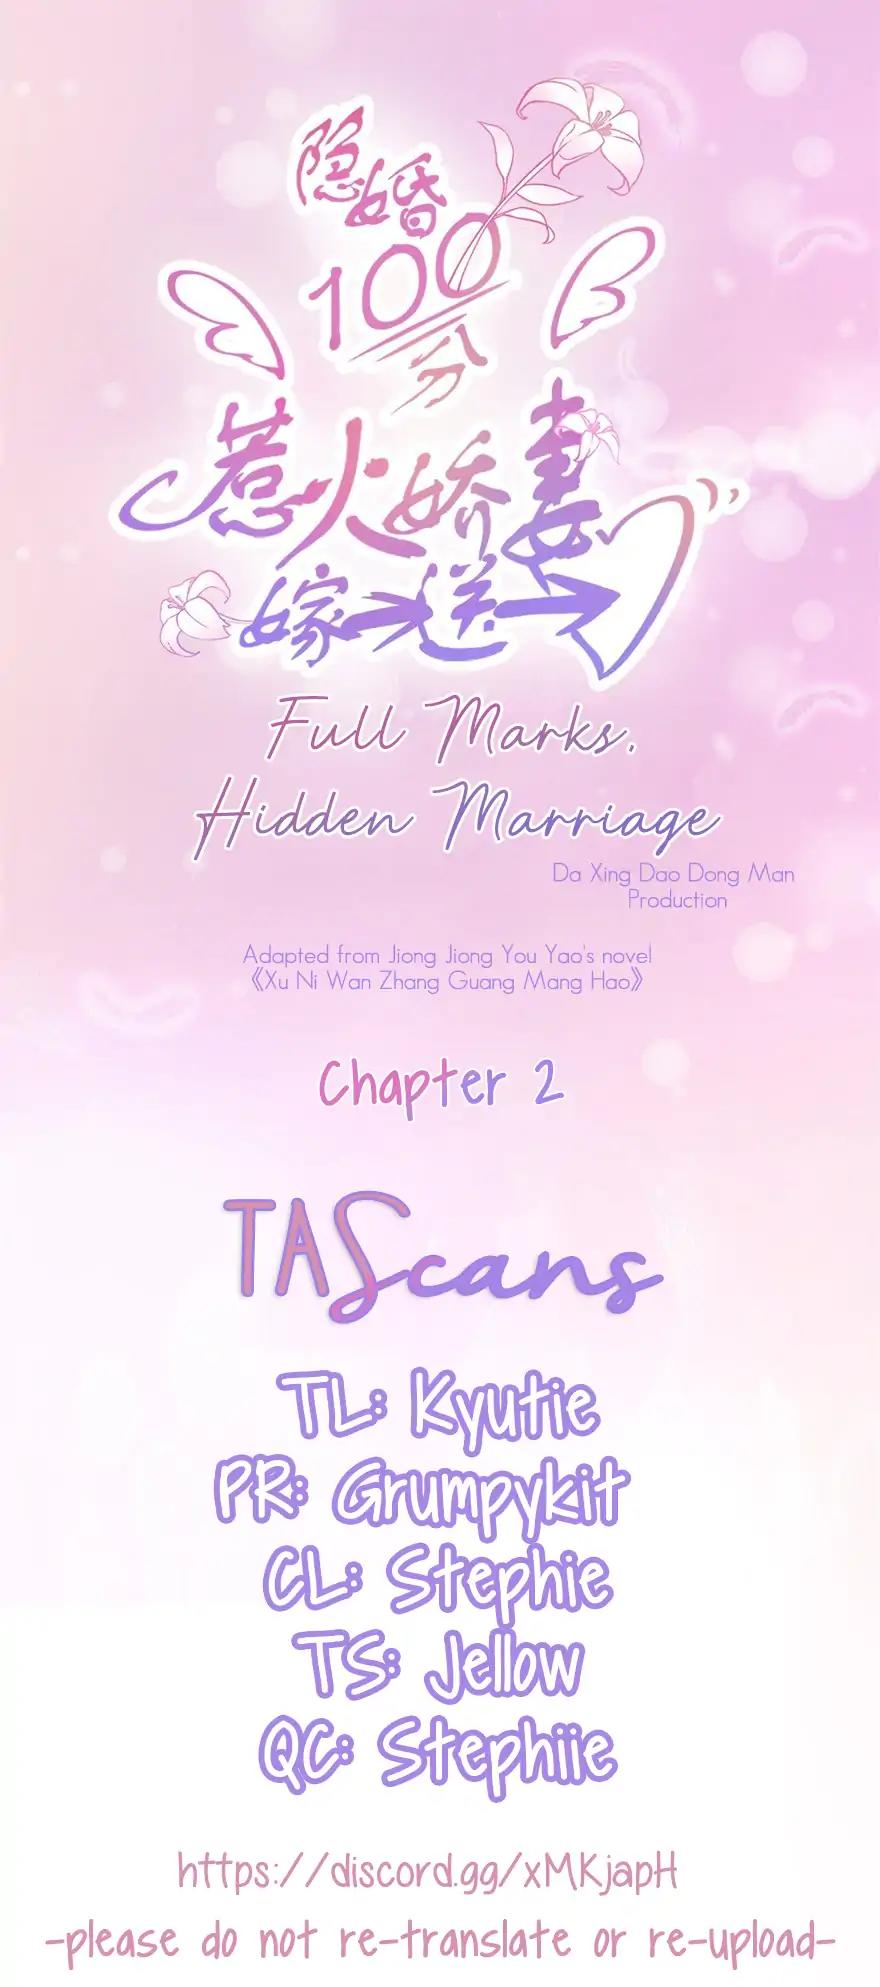 Full Marks, Hidden Marriage Chapter 2: